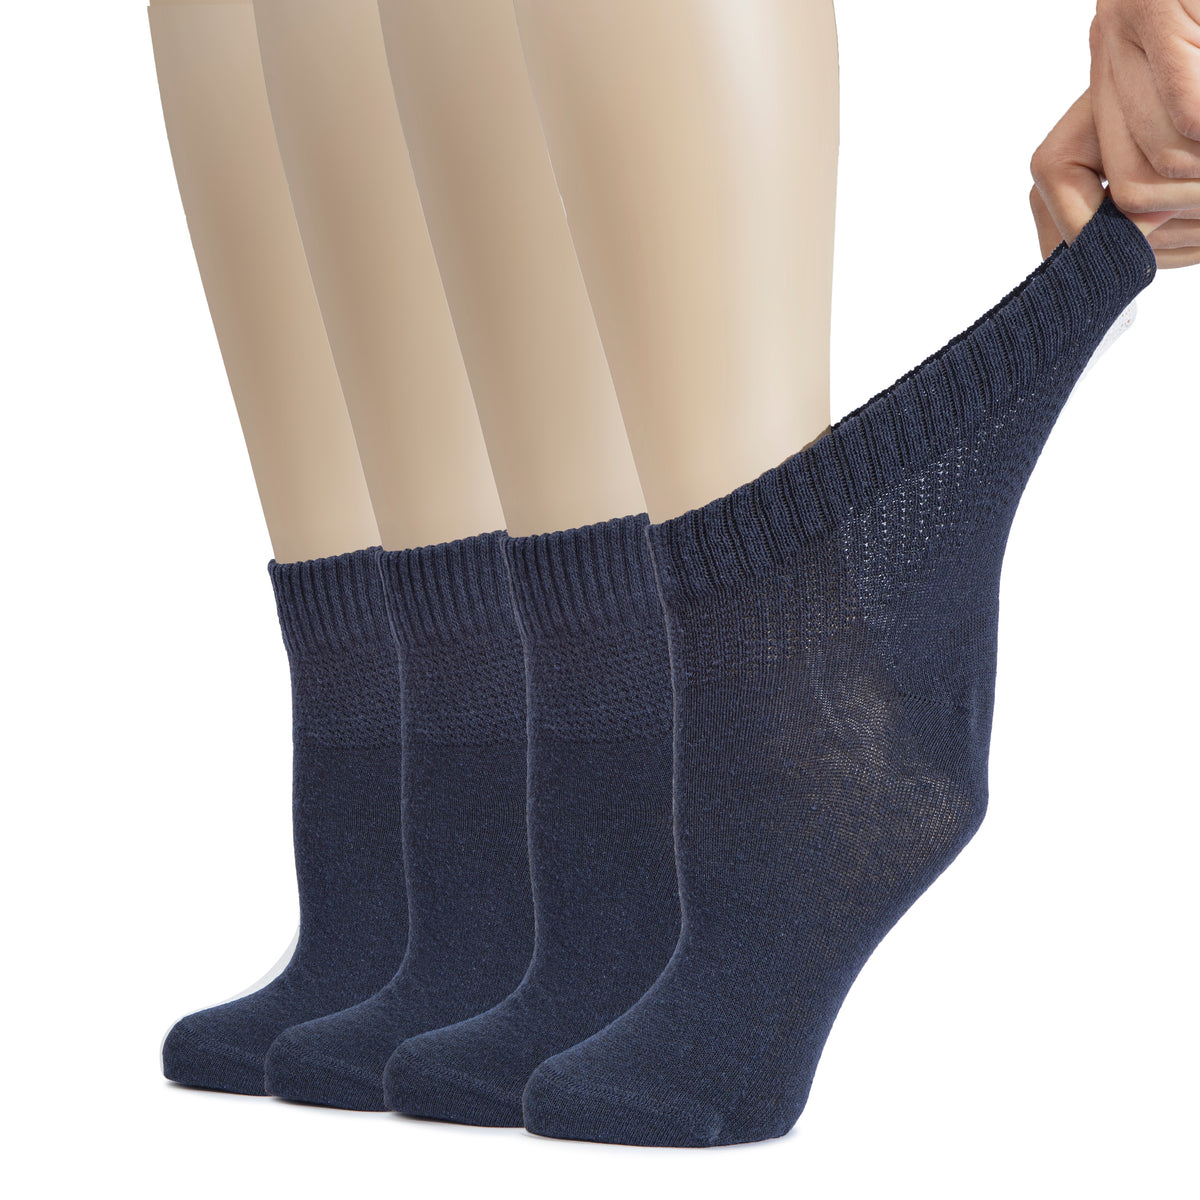 A mannequin displays women's blue cotton diabetic ankle socks, designed for comfort and support.